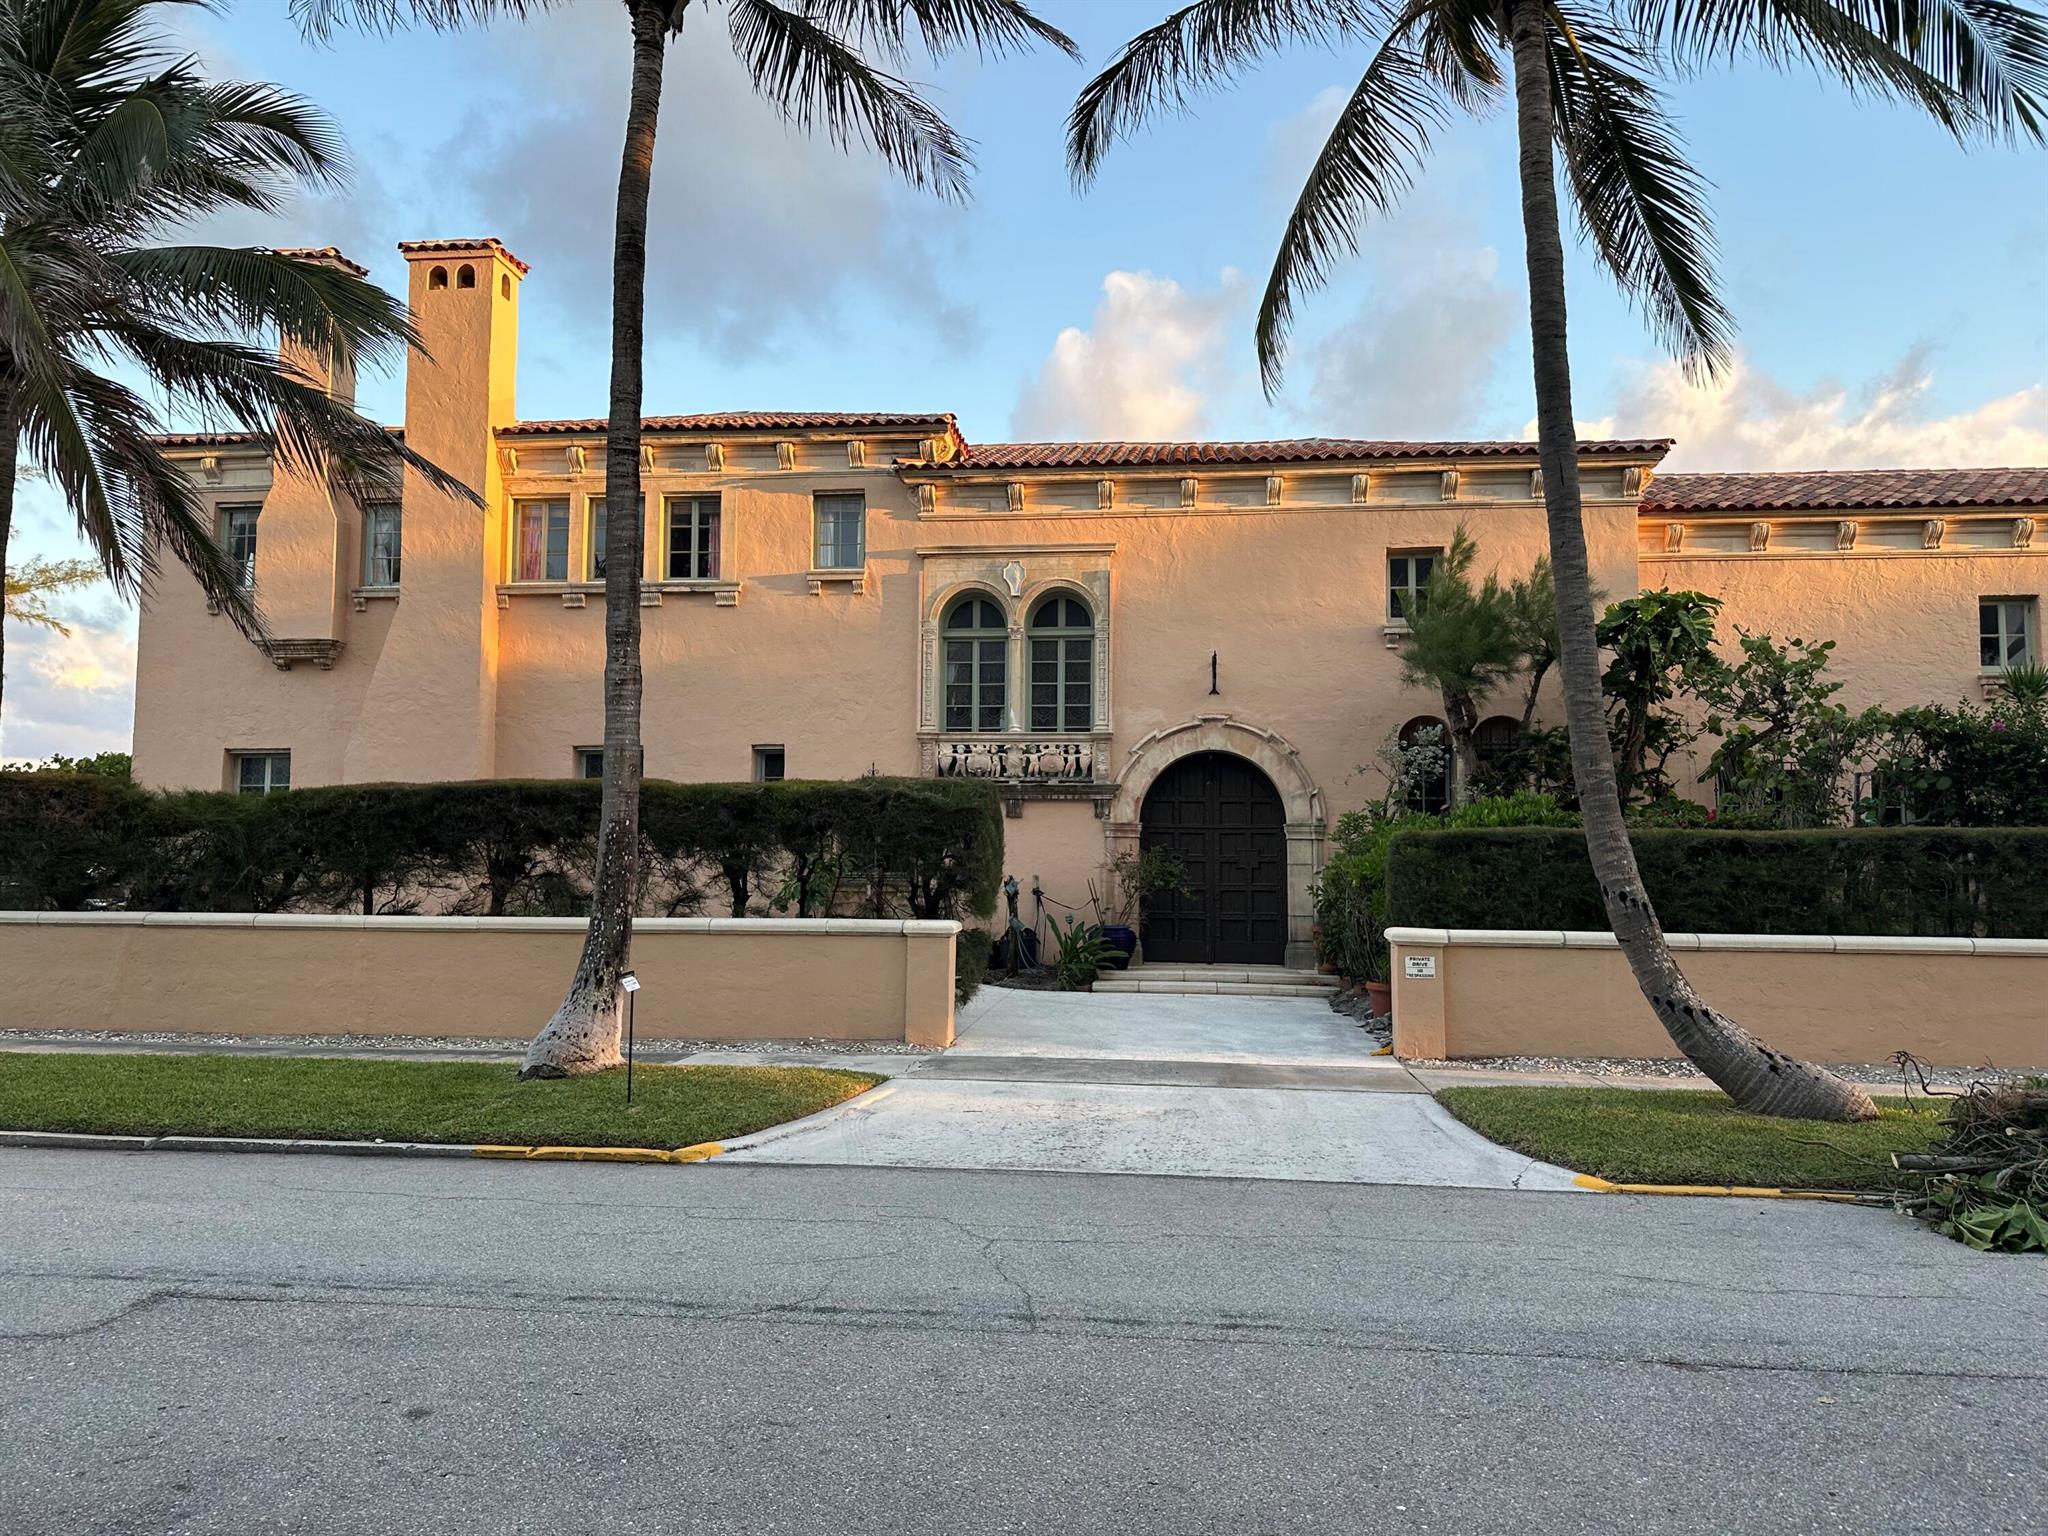 Rare Offering: ''Old Palm Beach'' Ocean Front Property. Addison Mizner Architect. 232' of deeded private beach. sweeping front lawn. ball room/LR, sunroom, master, guest rooms all with direct ocean views, 5 bedroom, 5 full bath, 1 half bath. pool, interior courtyard with original working fountain. All original Mizner architectural features, including 16th century oak paneling. Elizabethan-era stain glass. ornate carvings, decorative tile work, cast limestone detailing, elaborate arches, hand-painted coffered ceiling, pecky cypress ceilings and beams throughout, original fixtures, hand carved doors, intricate ironwork. These distinctive details add richness and visual interest to this home, showcasing the historical craftsmanship and artistic flair.